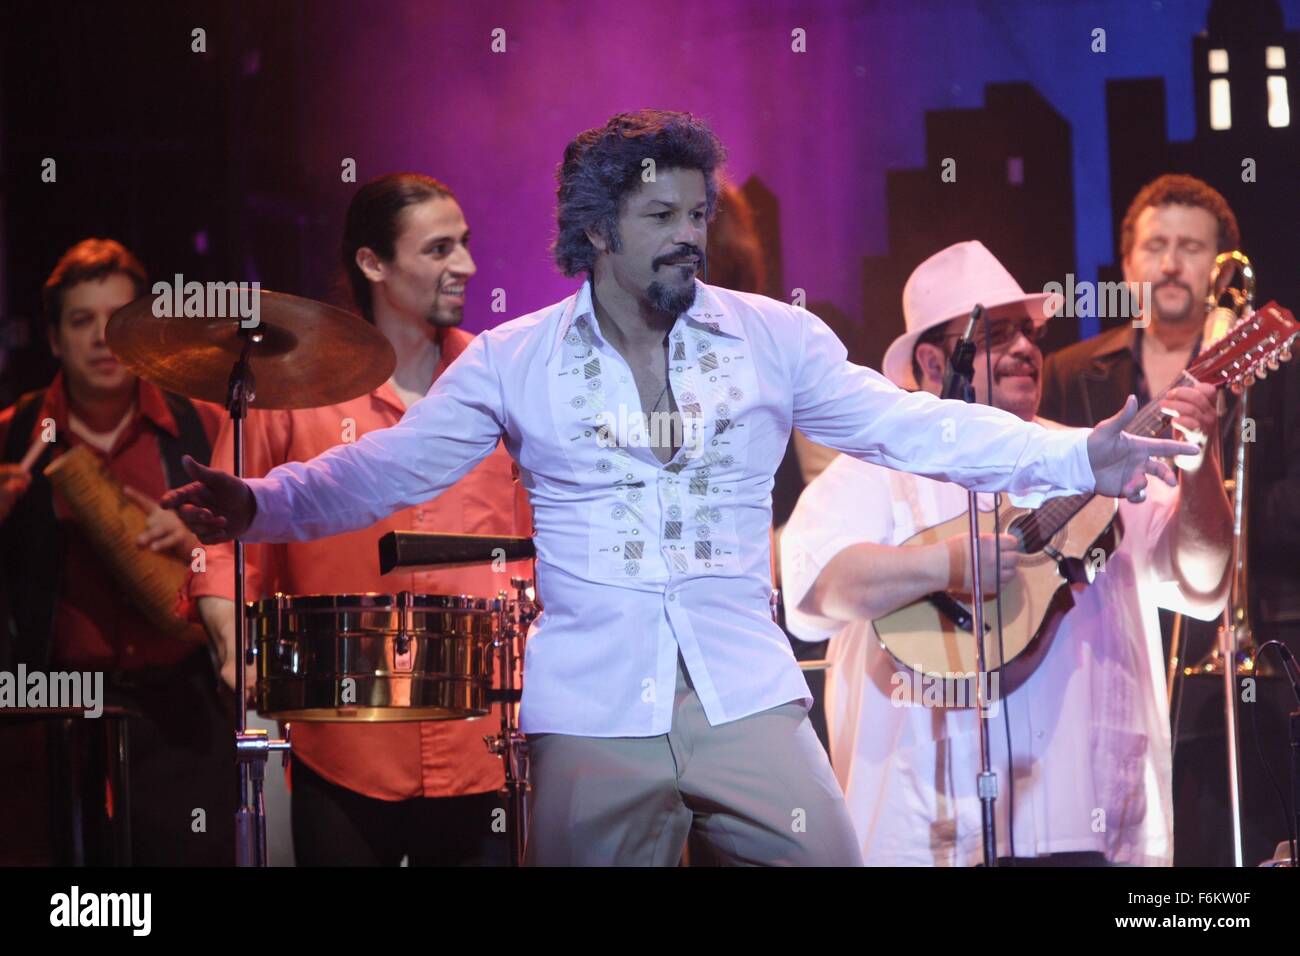 RELEASE DATE: 3 August 2007. TITLE: El cantante. STUDIO: Nuyorican Productions. PLOT: The life story of Hector Lavoe who started the salsa movement in 1975 and brought it to the United States. PICTURED: JOHN ORTIZ as Willie Colon. Stock Photo